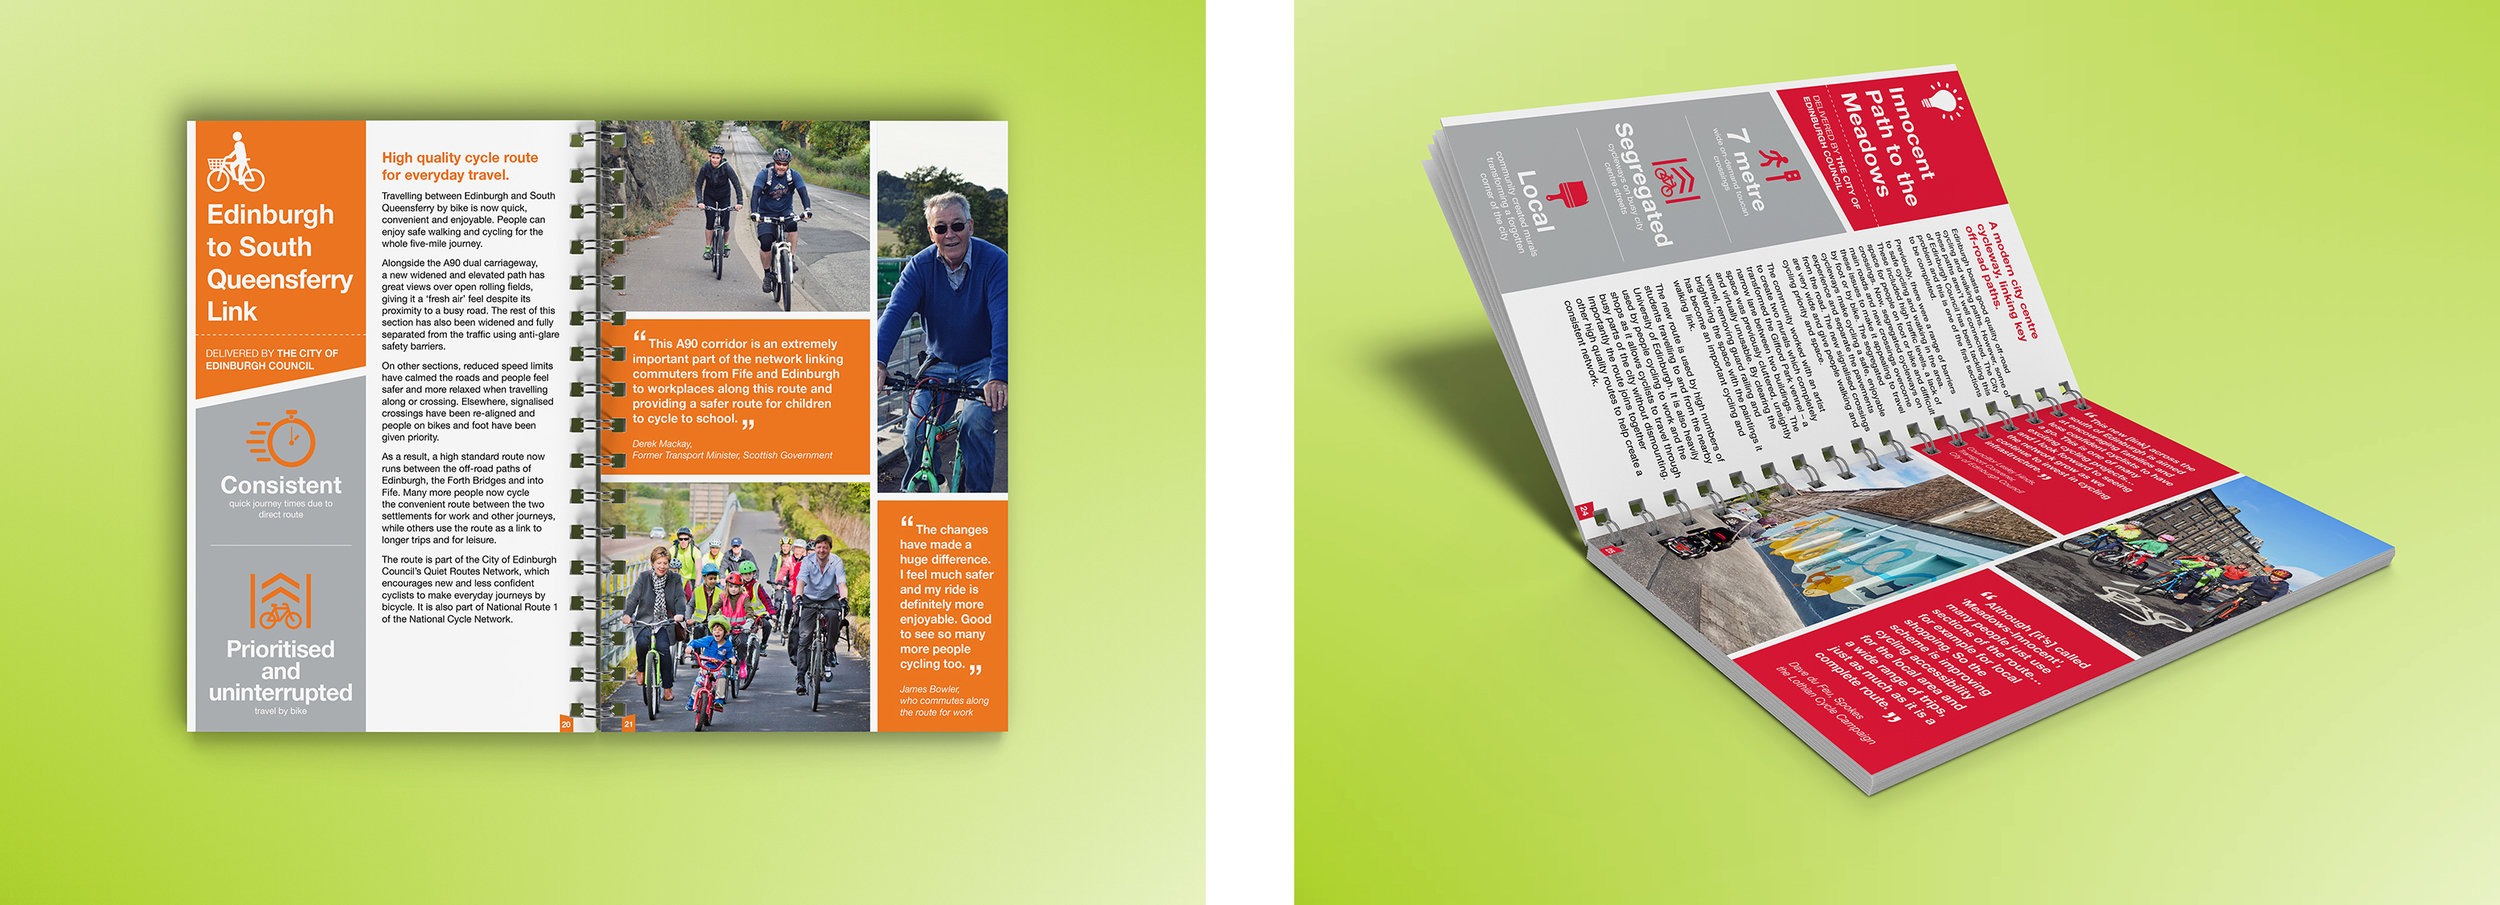 The digital showcase we developed for Community Links Plus received very positive feedback, fulfilling its purpose as a promotional item and advertisement for Sustrans’ work.